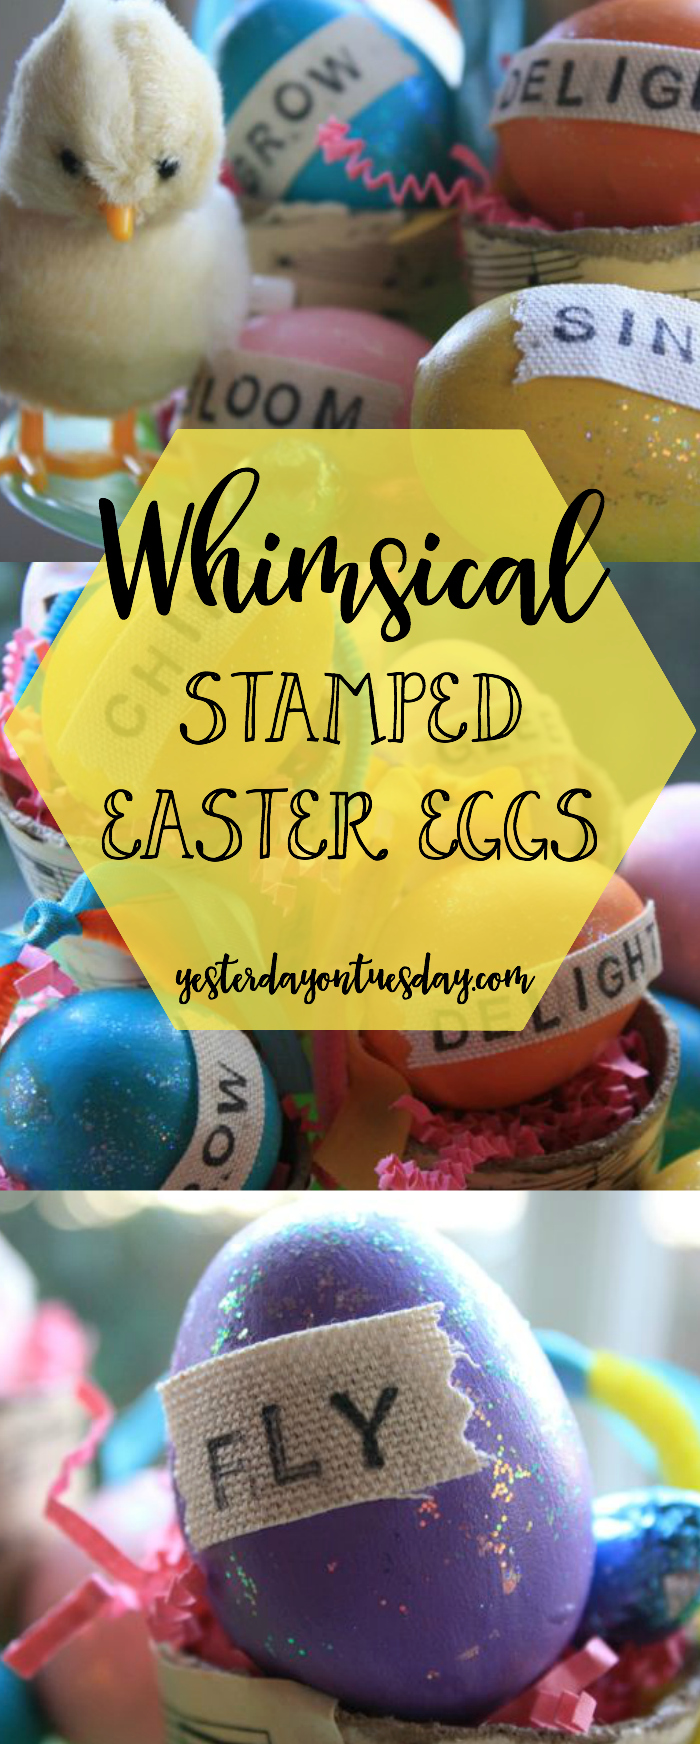 Whimsical Stamped Easter Eggs